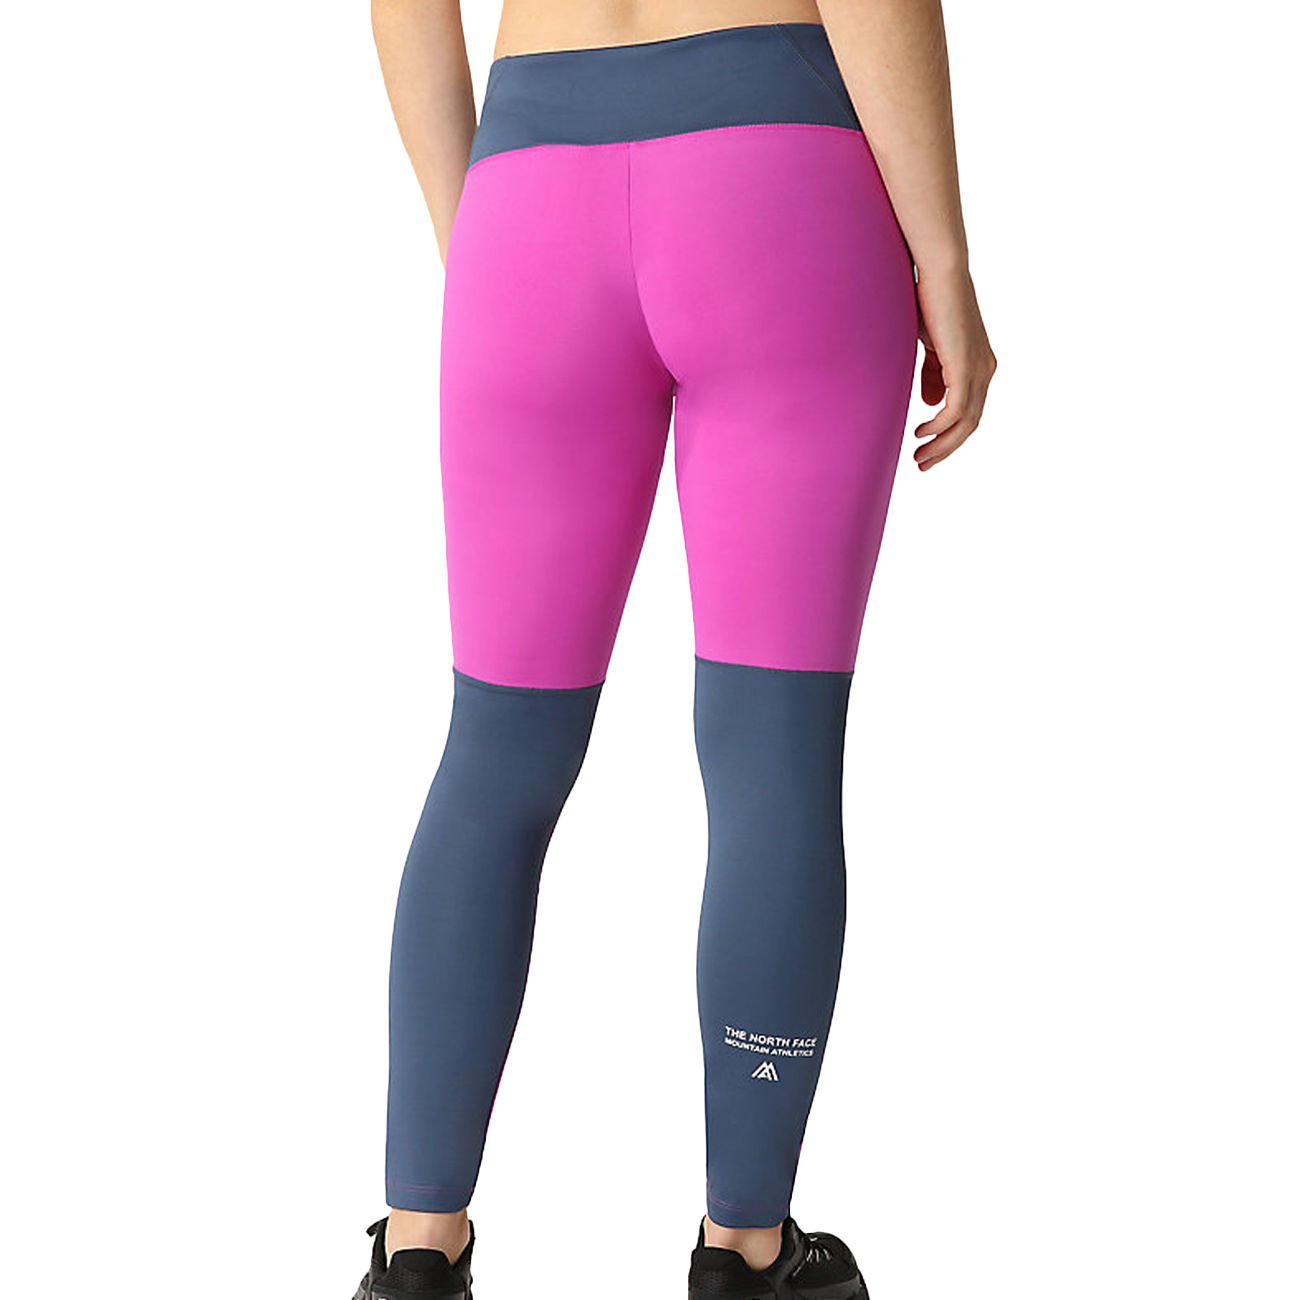 TIGHTS - THE NORTH FACE - W MOUNTAIN ATHLETICS LEGGINGS